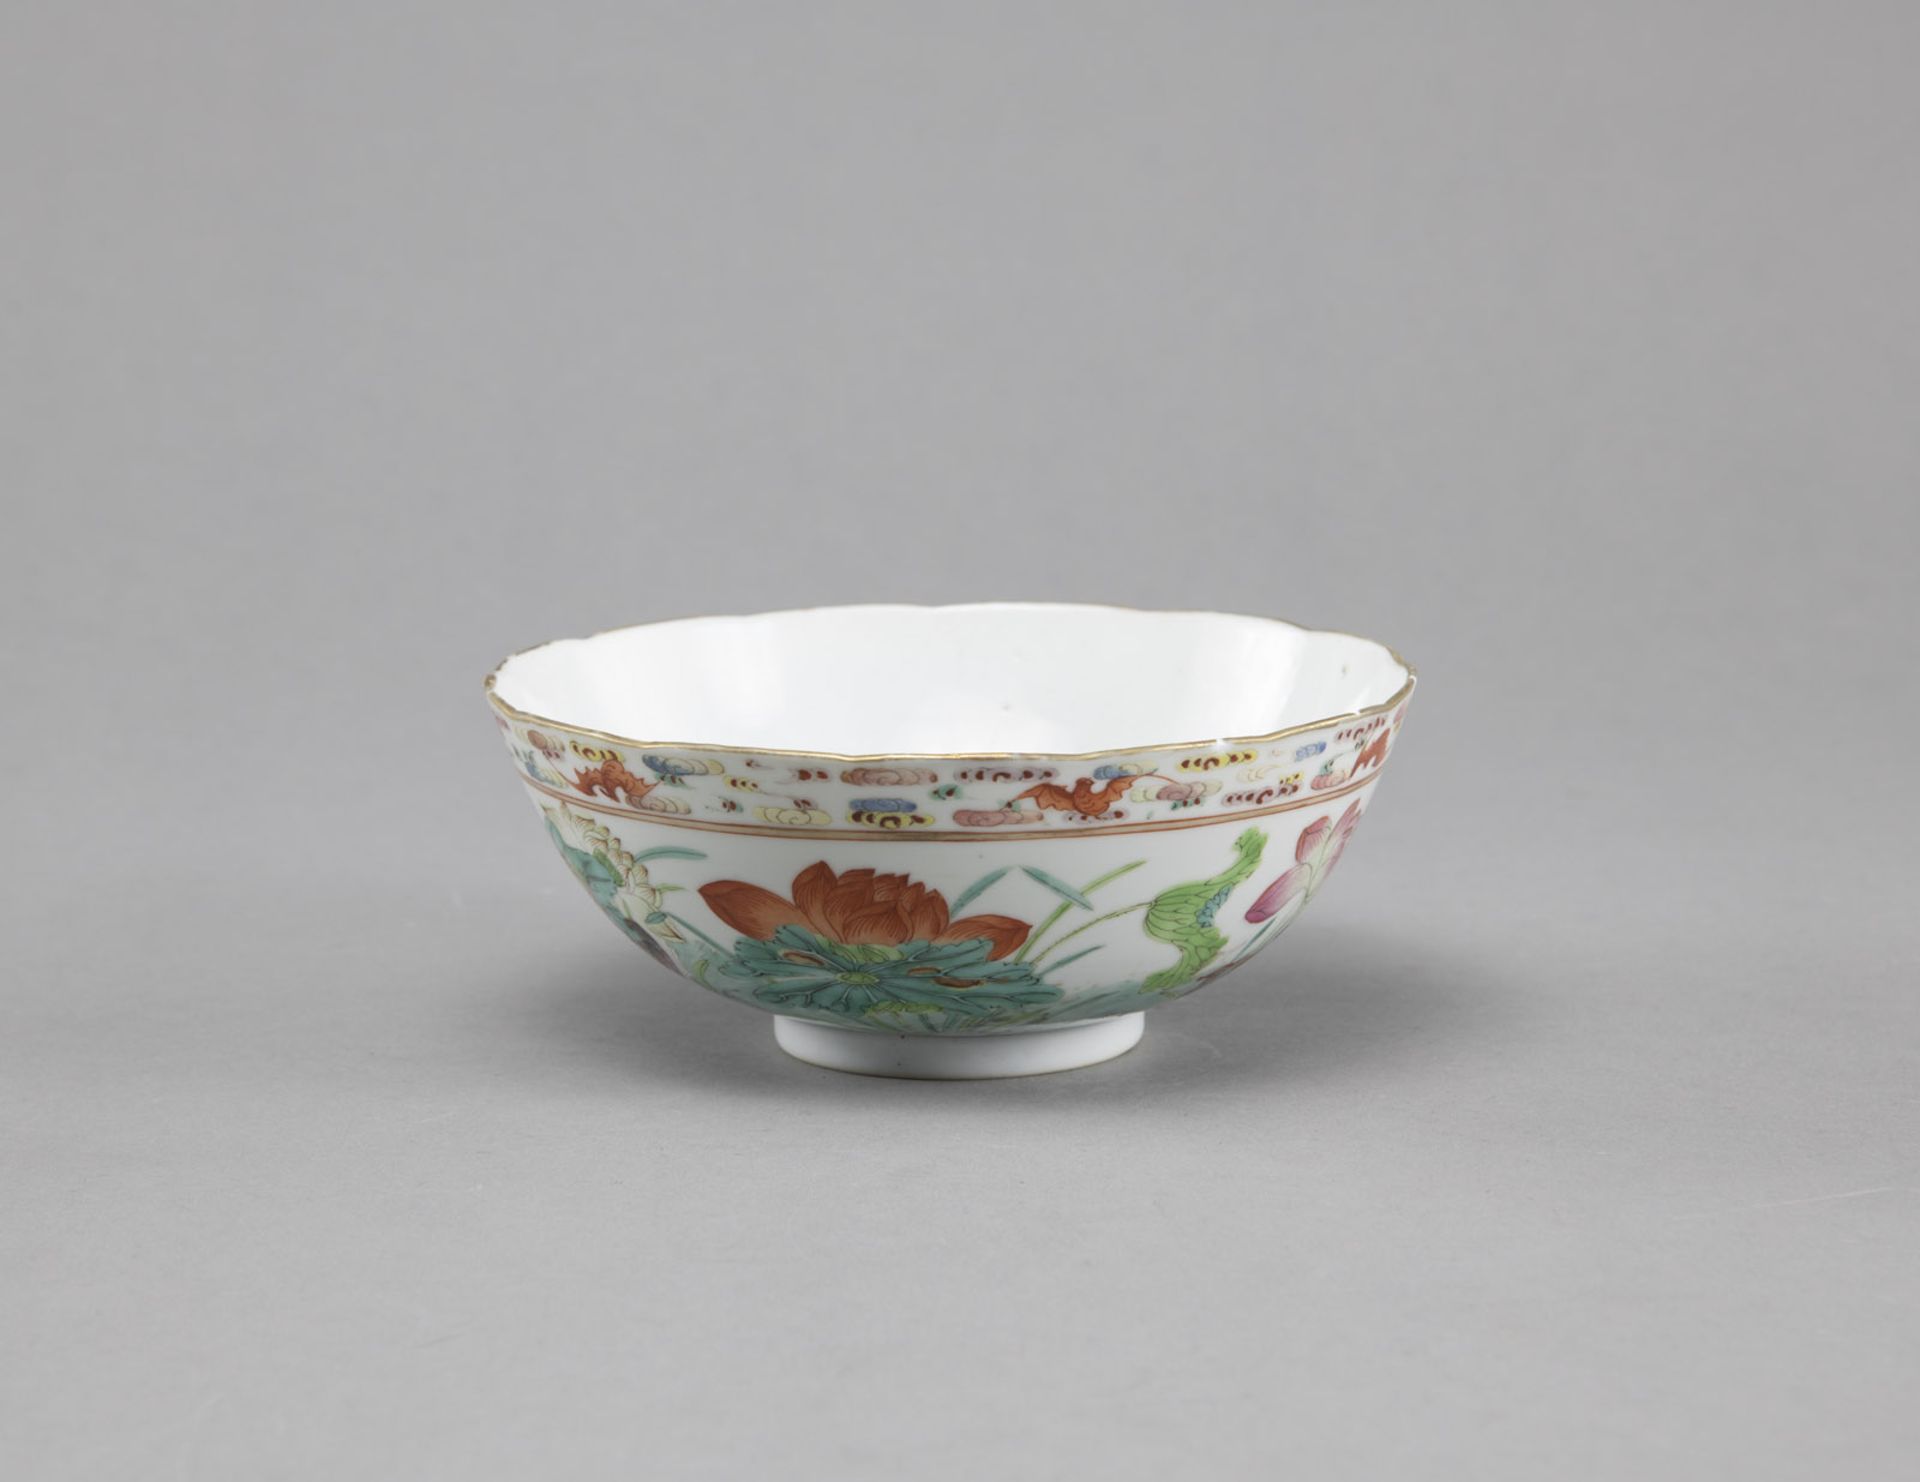 A 'FAMILLE ROSE' PORCELAIN BOWL DEPICTING A LOTUS POND WITH DUCKS - Image 6 of 8